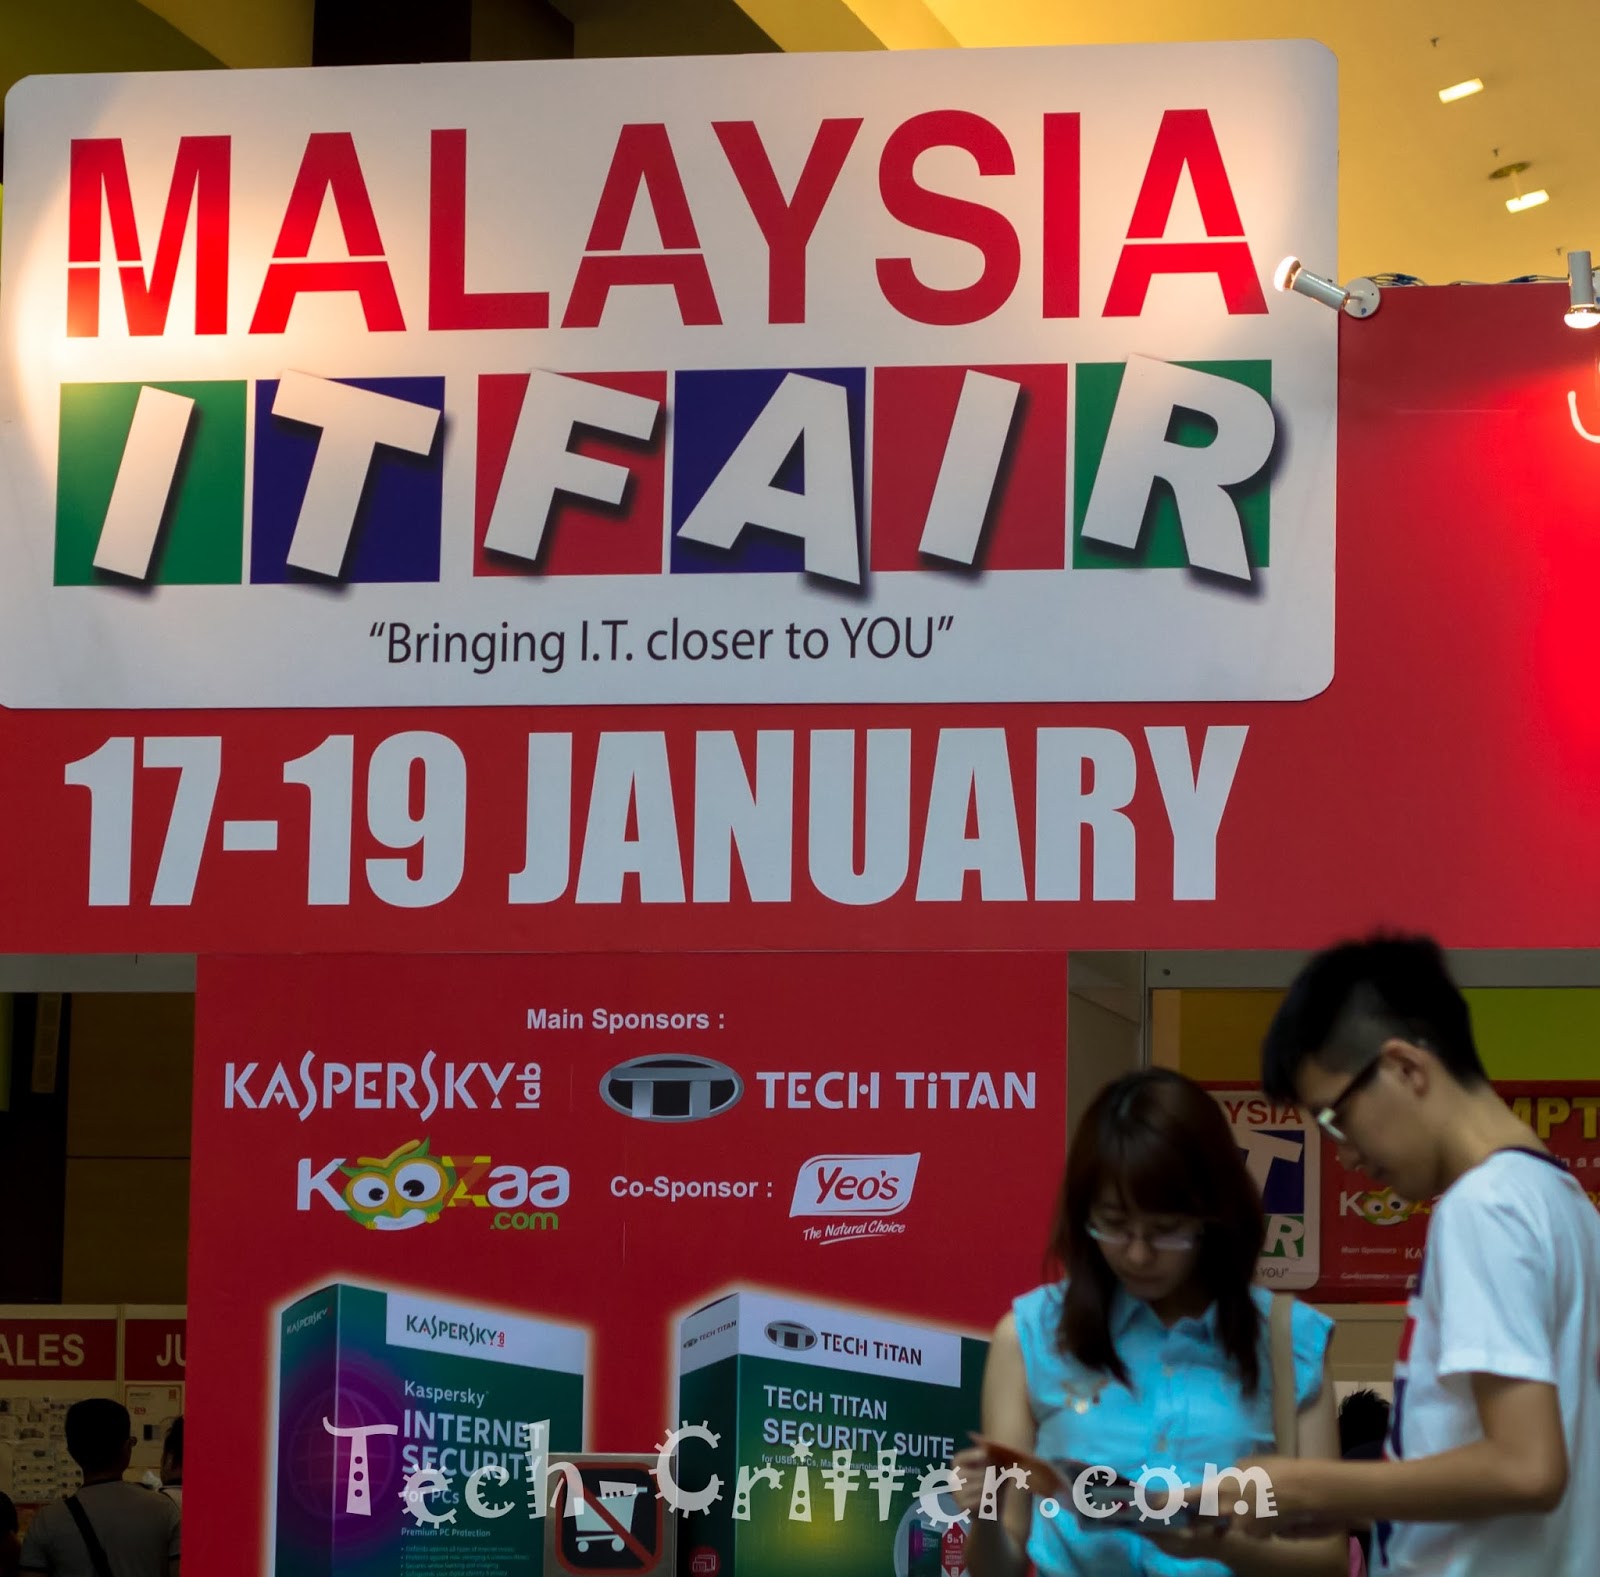 Coverage of the Malaysia IT Fair @ Mid Valley (17 - 19 Jan 2014) 2